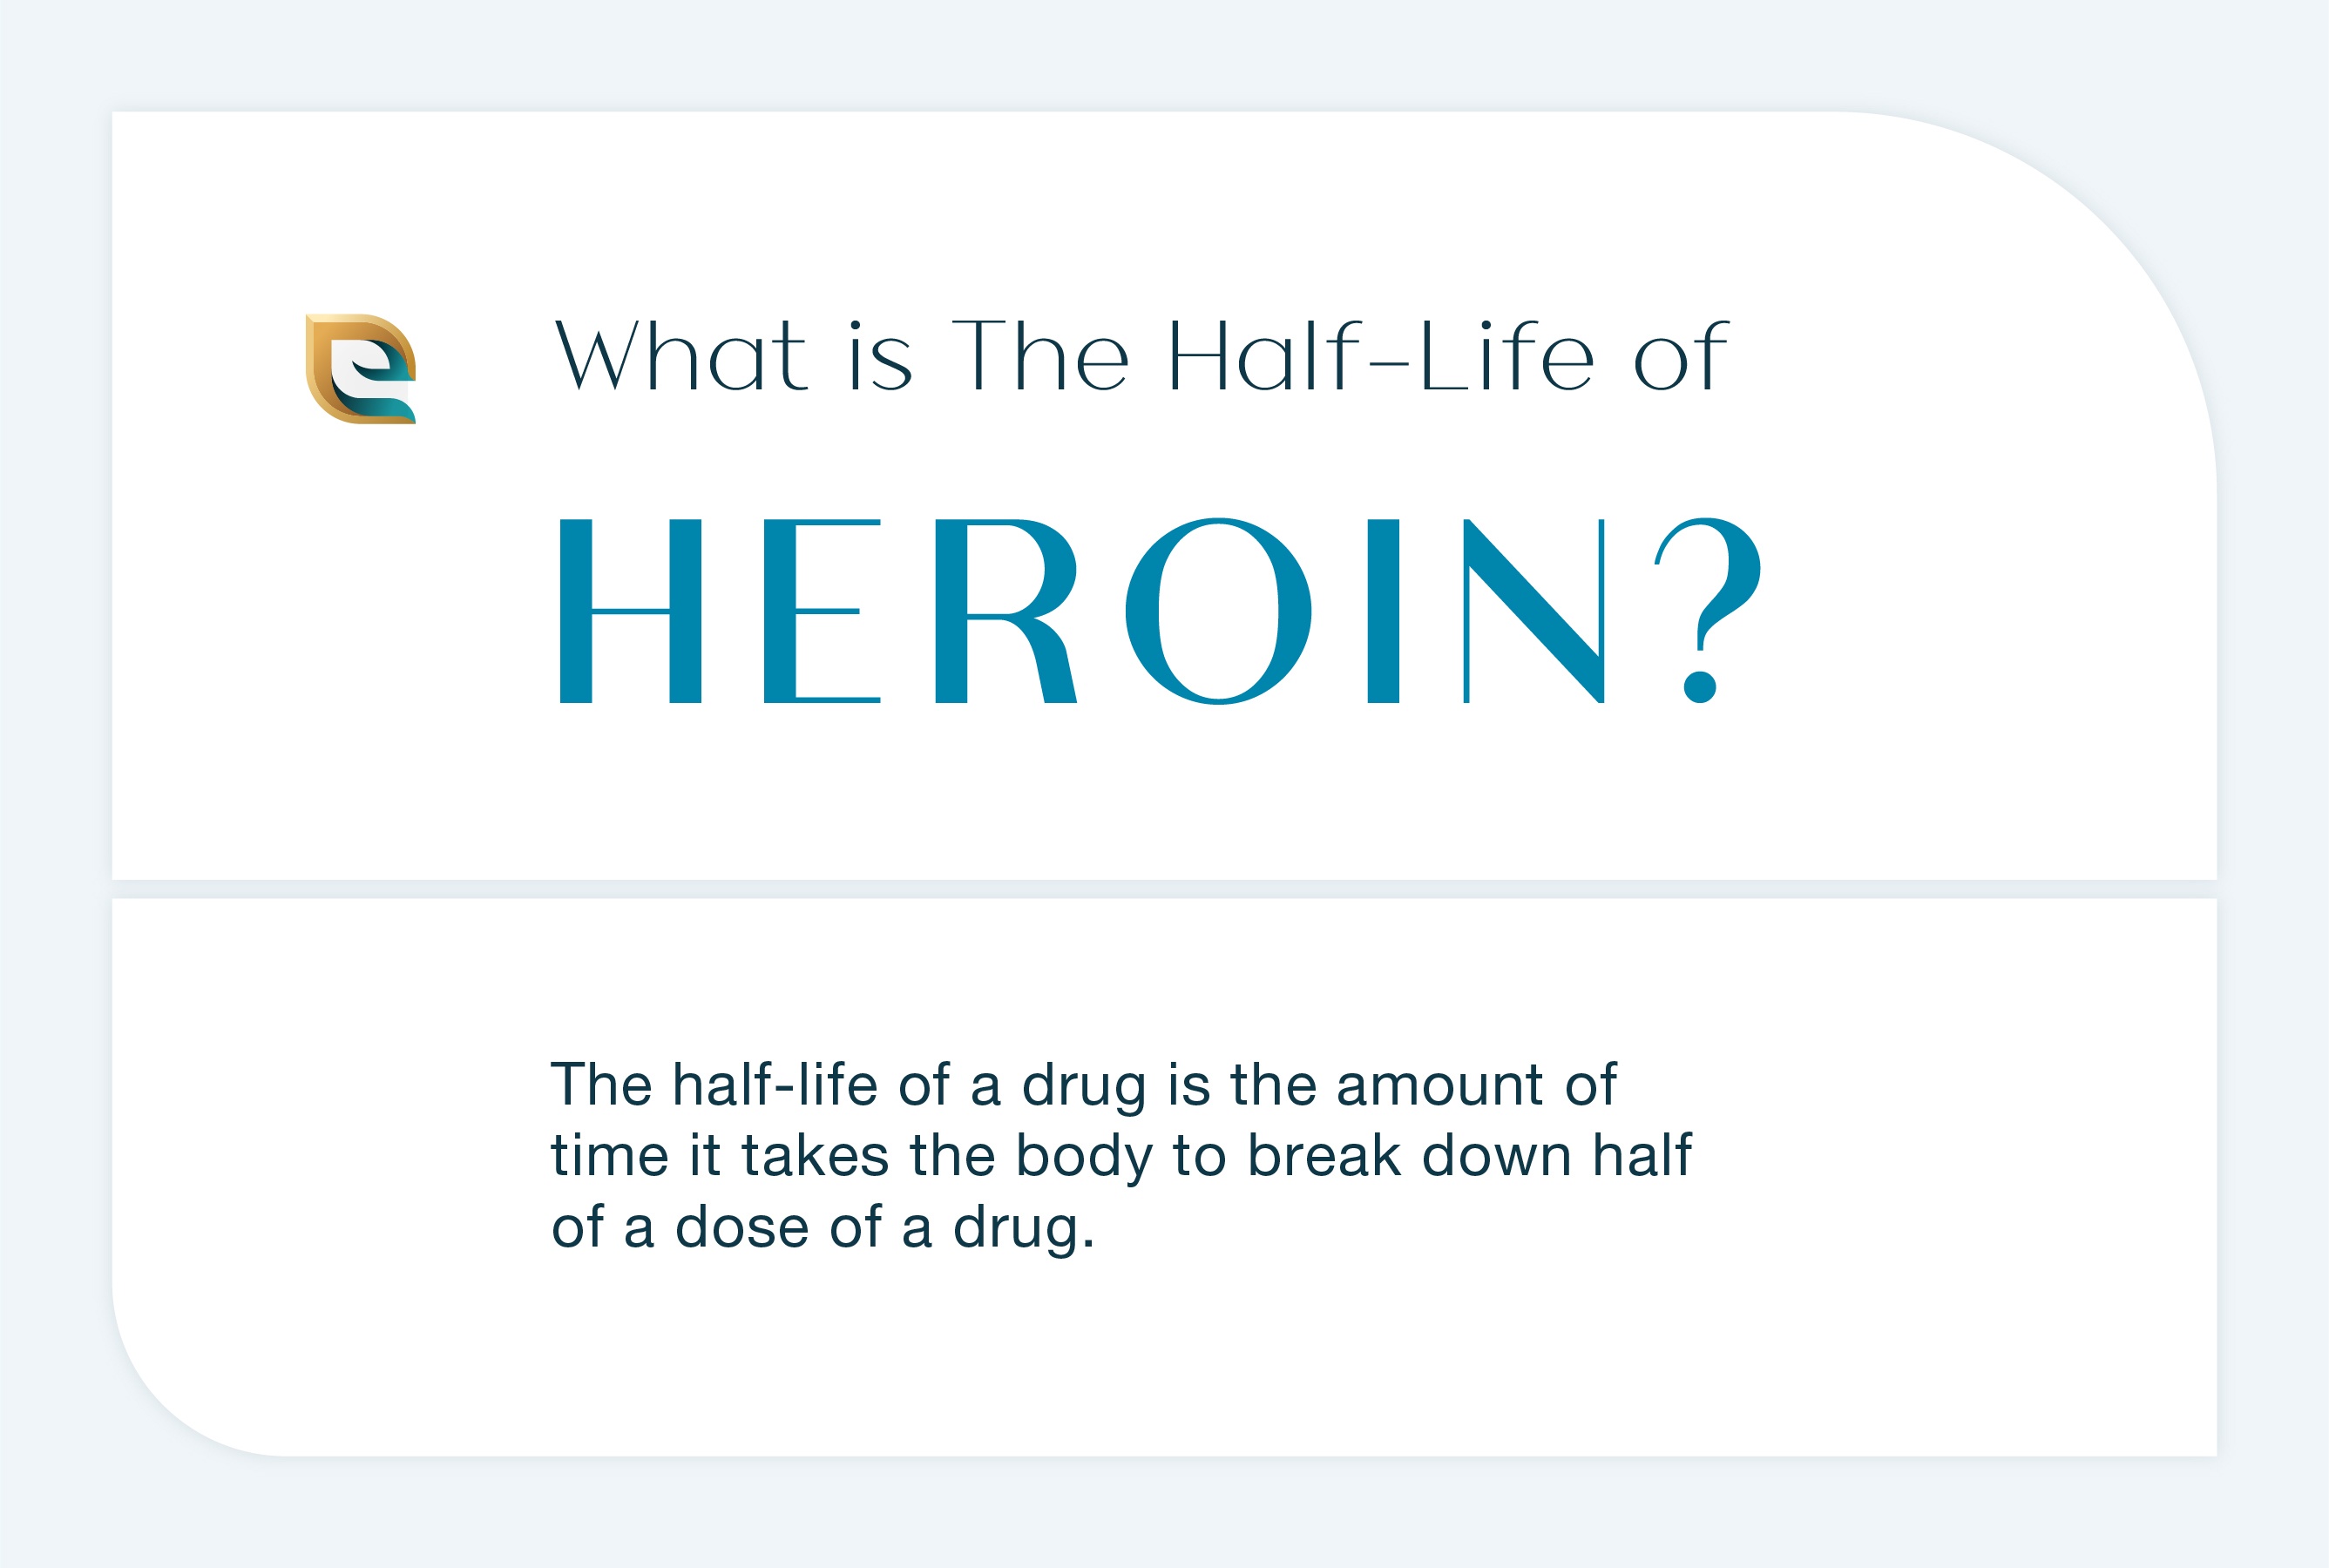 What Is Half Life of Heroin? This image describes the half life of Heroin